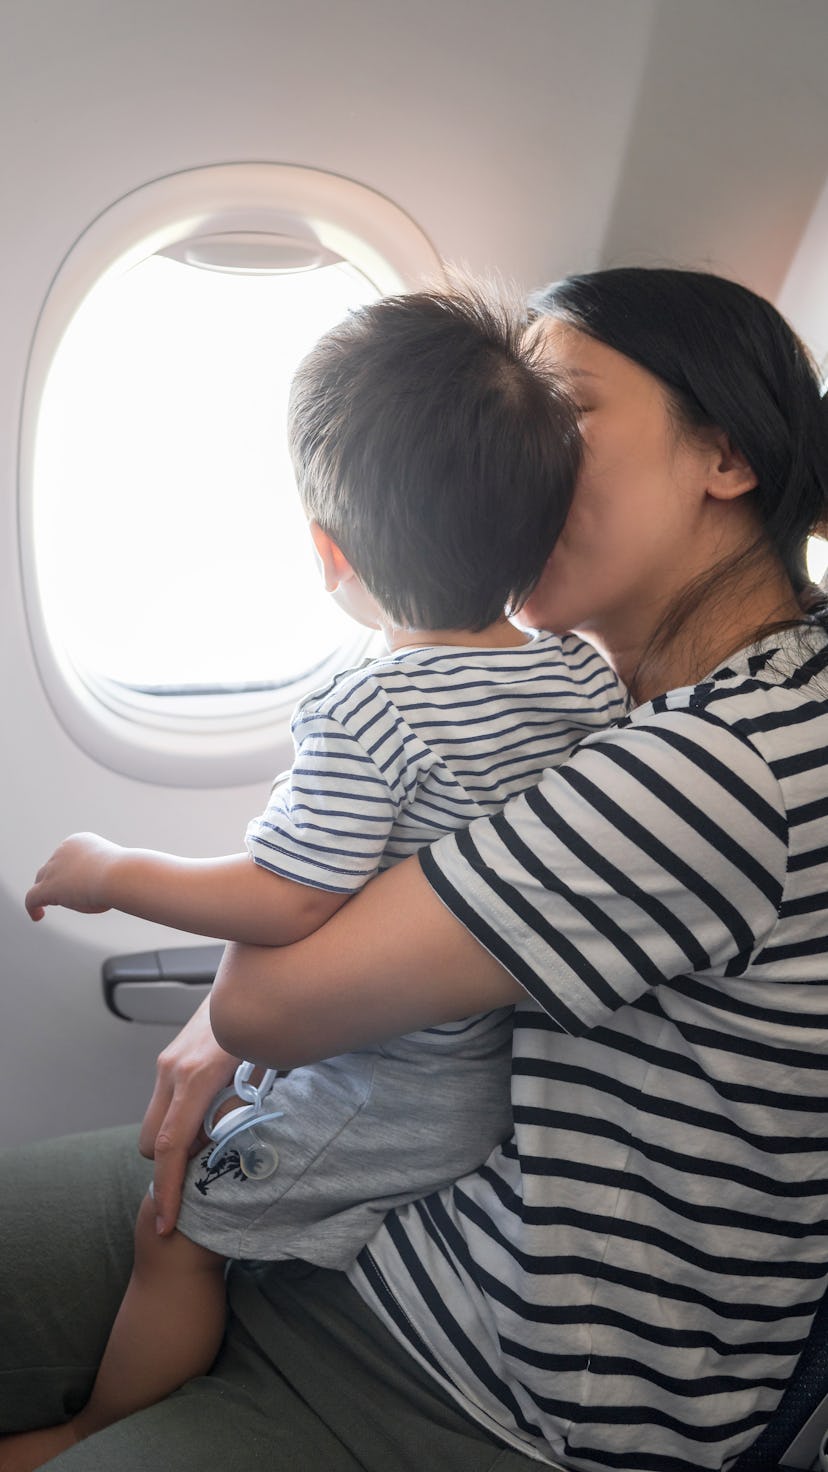 Infant traveling in airplane sitting on its mother lap both looking out of an airplane window. One y...